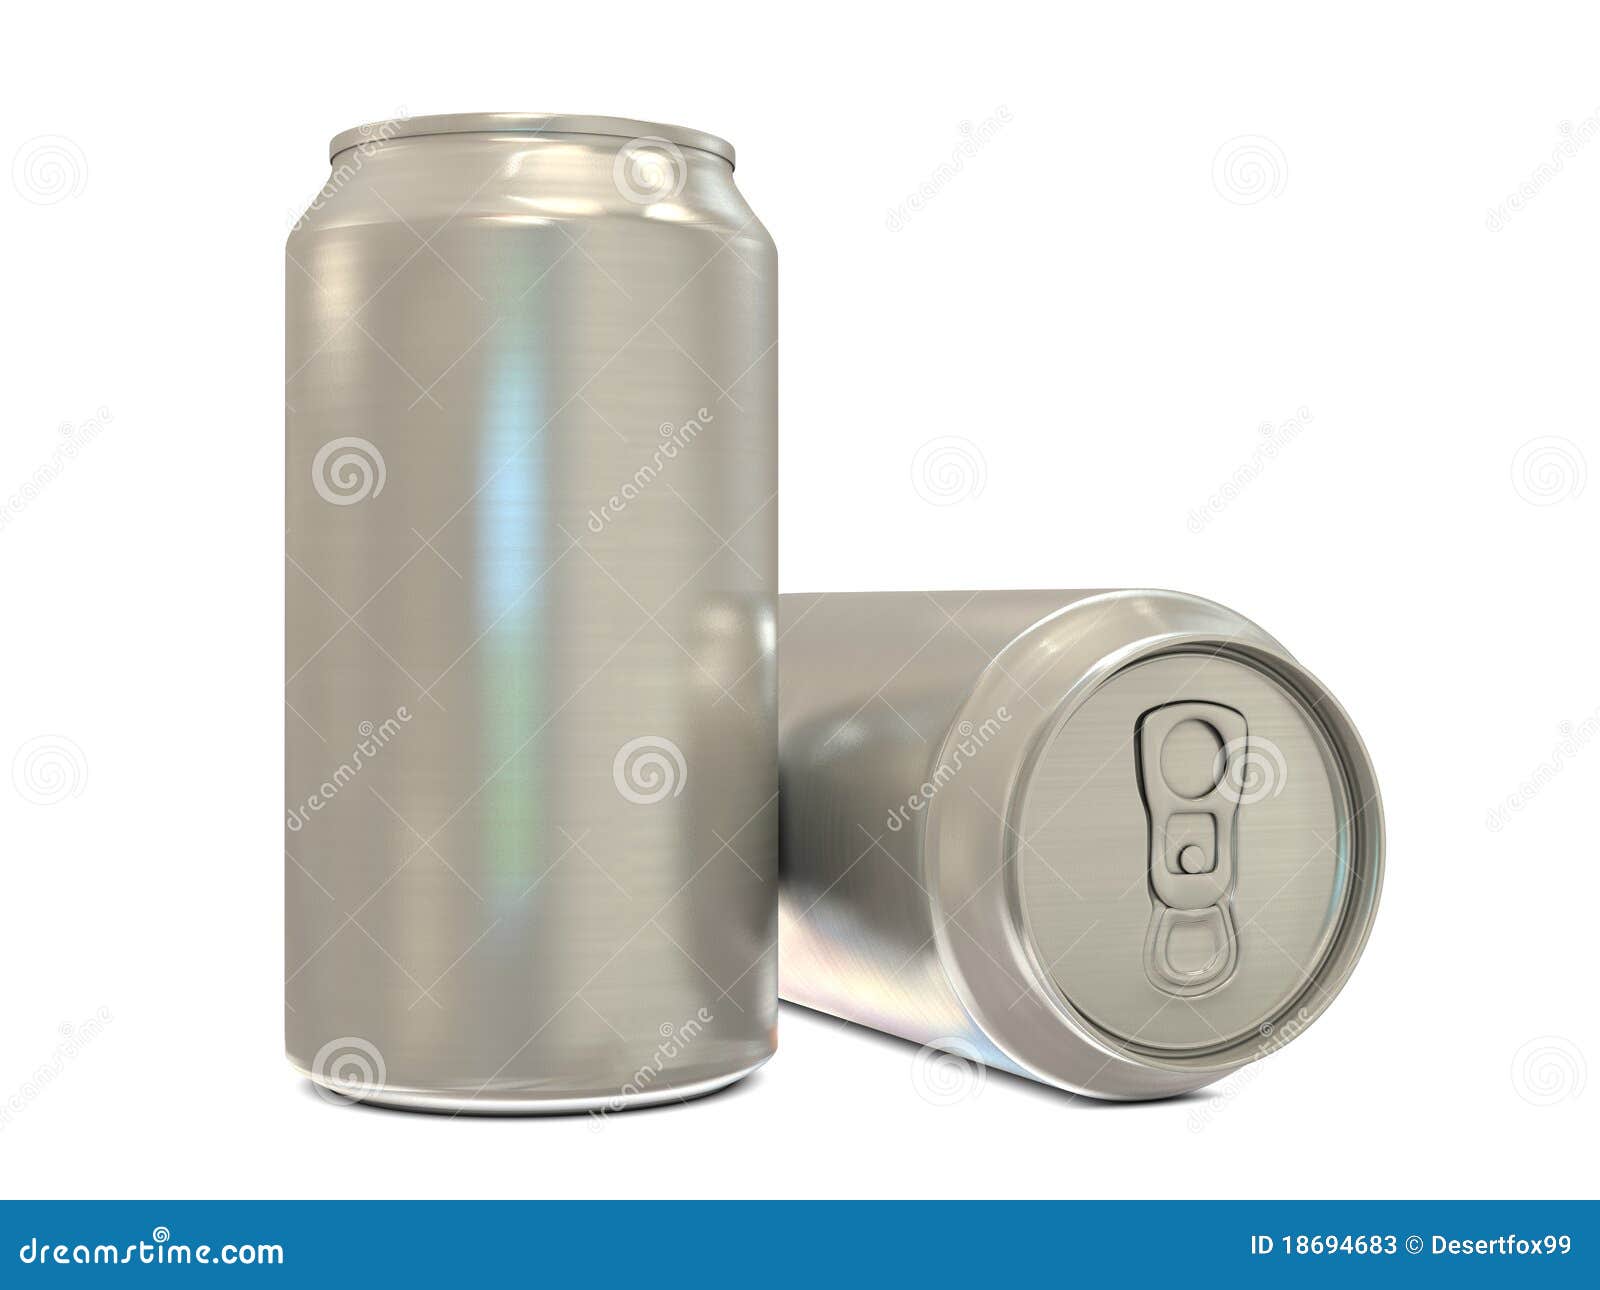 two-cans-18694683.jpg